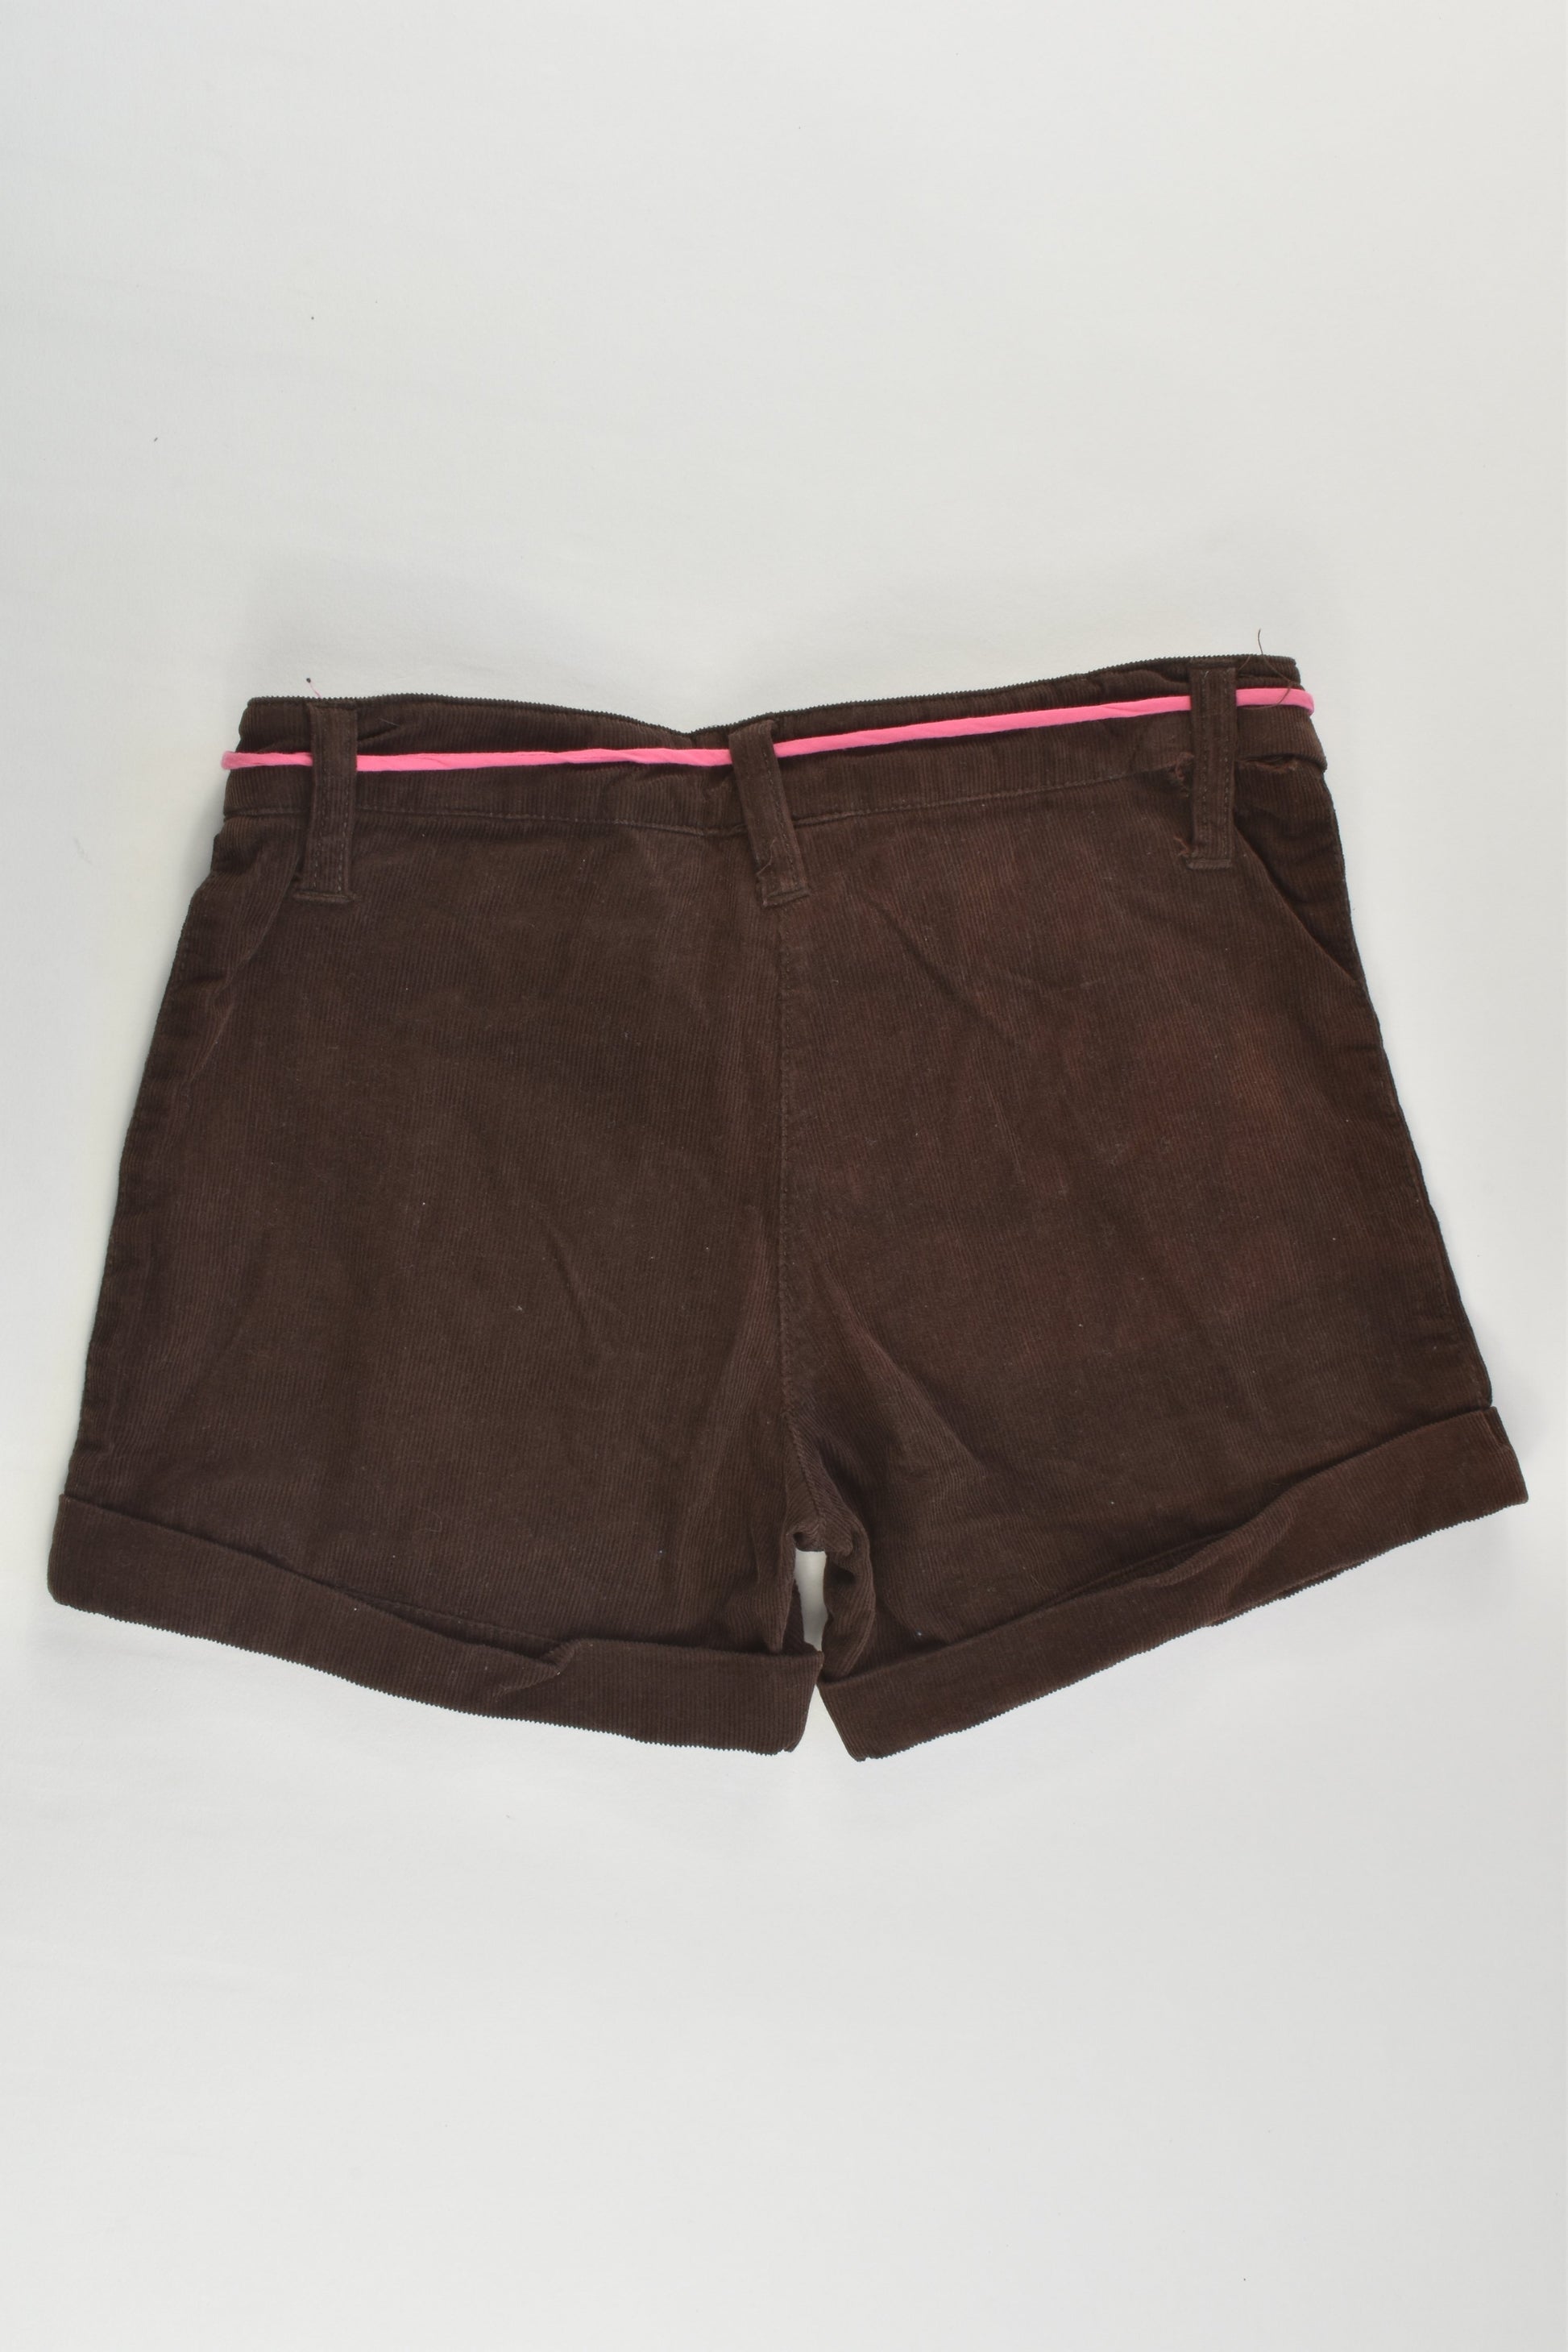 Origami Size 5 Cord Shorts